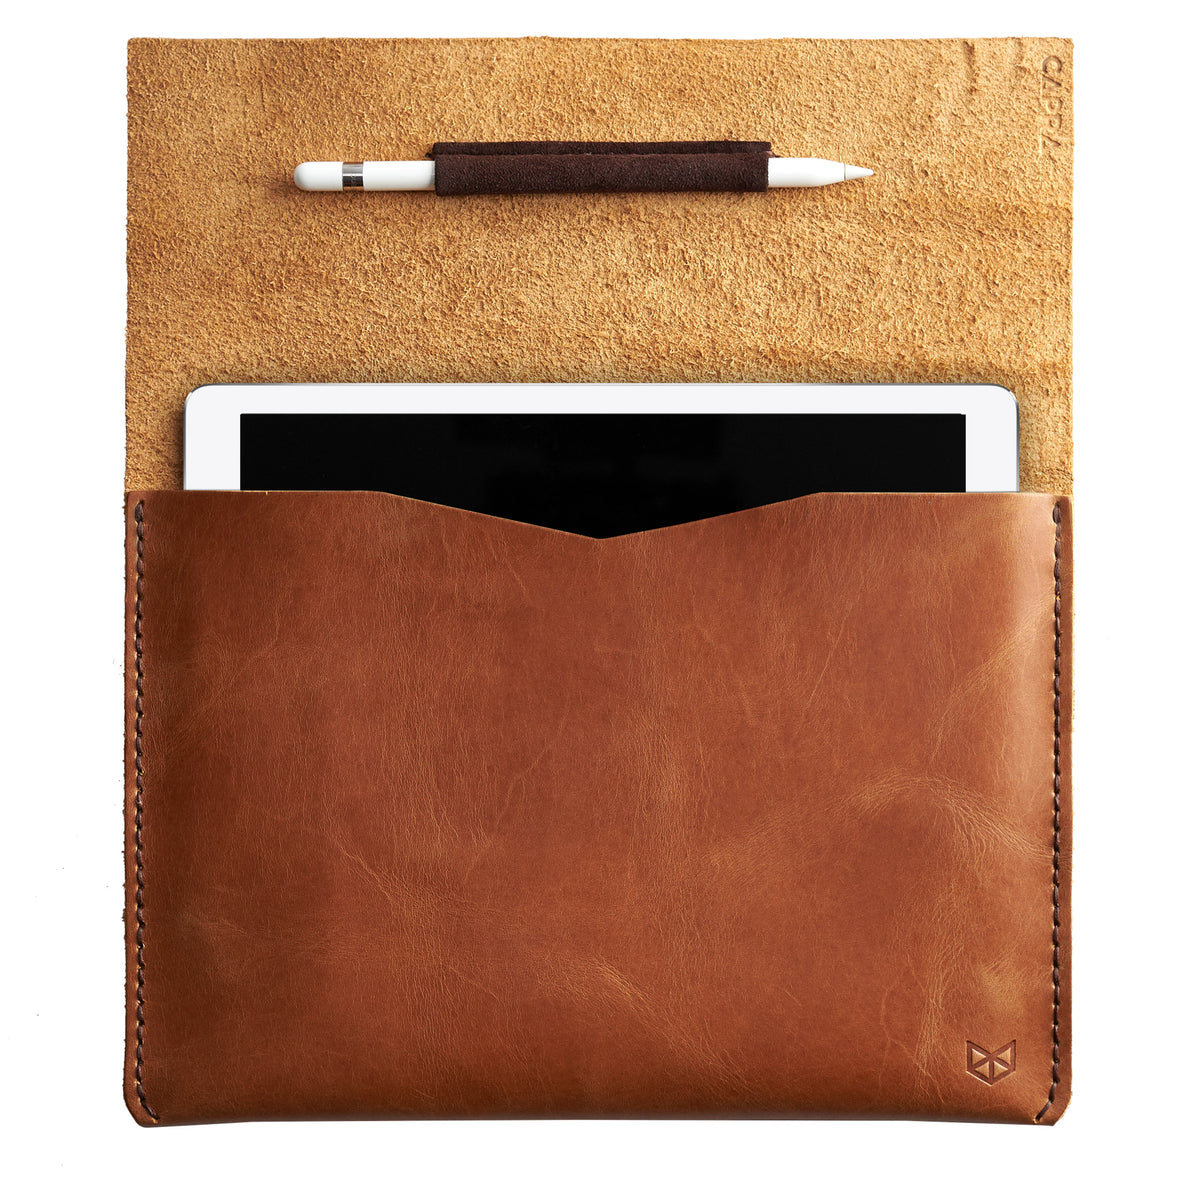 iPad Sleeve. Leather Case Tan for iPad by Capra Leather